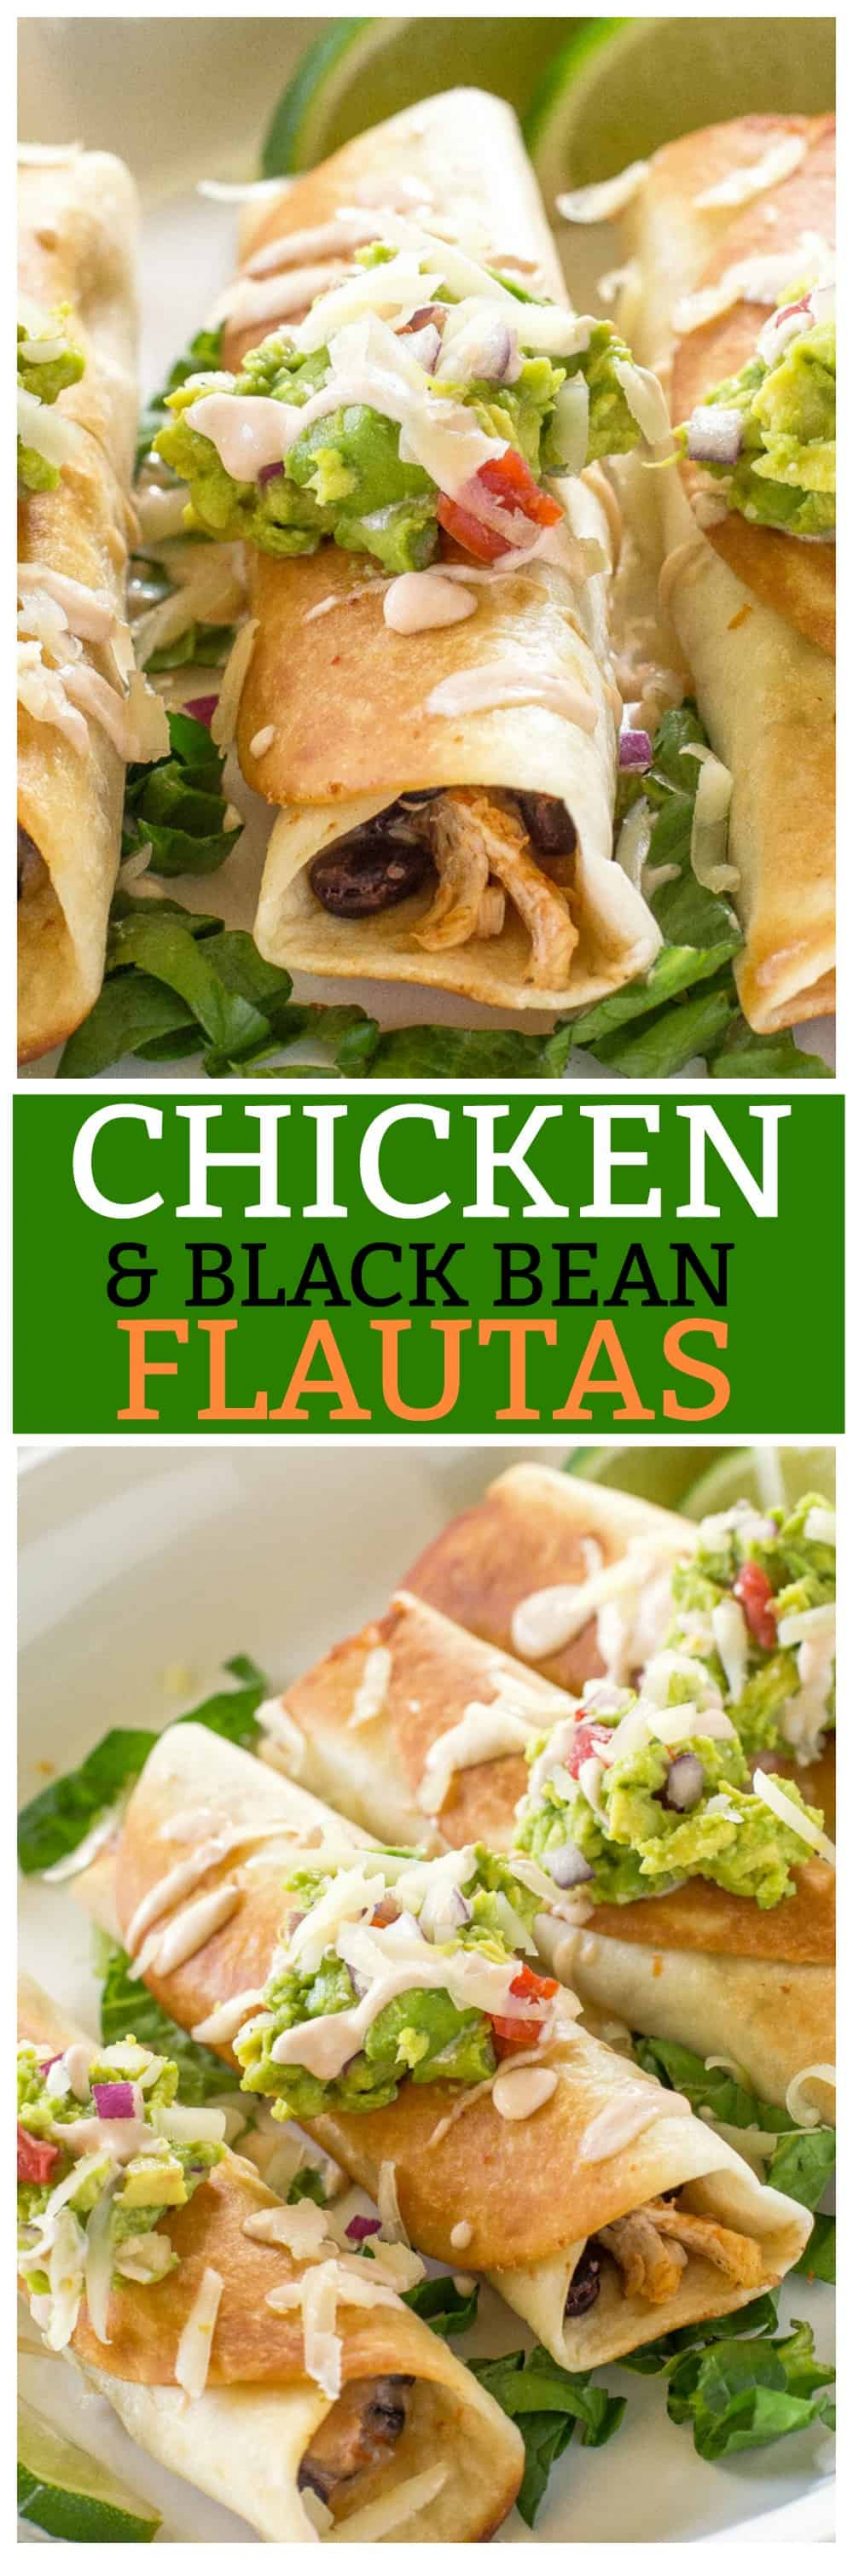 fb image scaled - Chicken and Black Bean Flautas